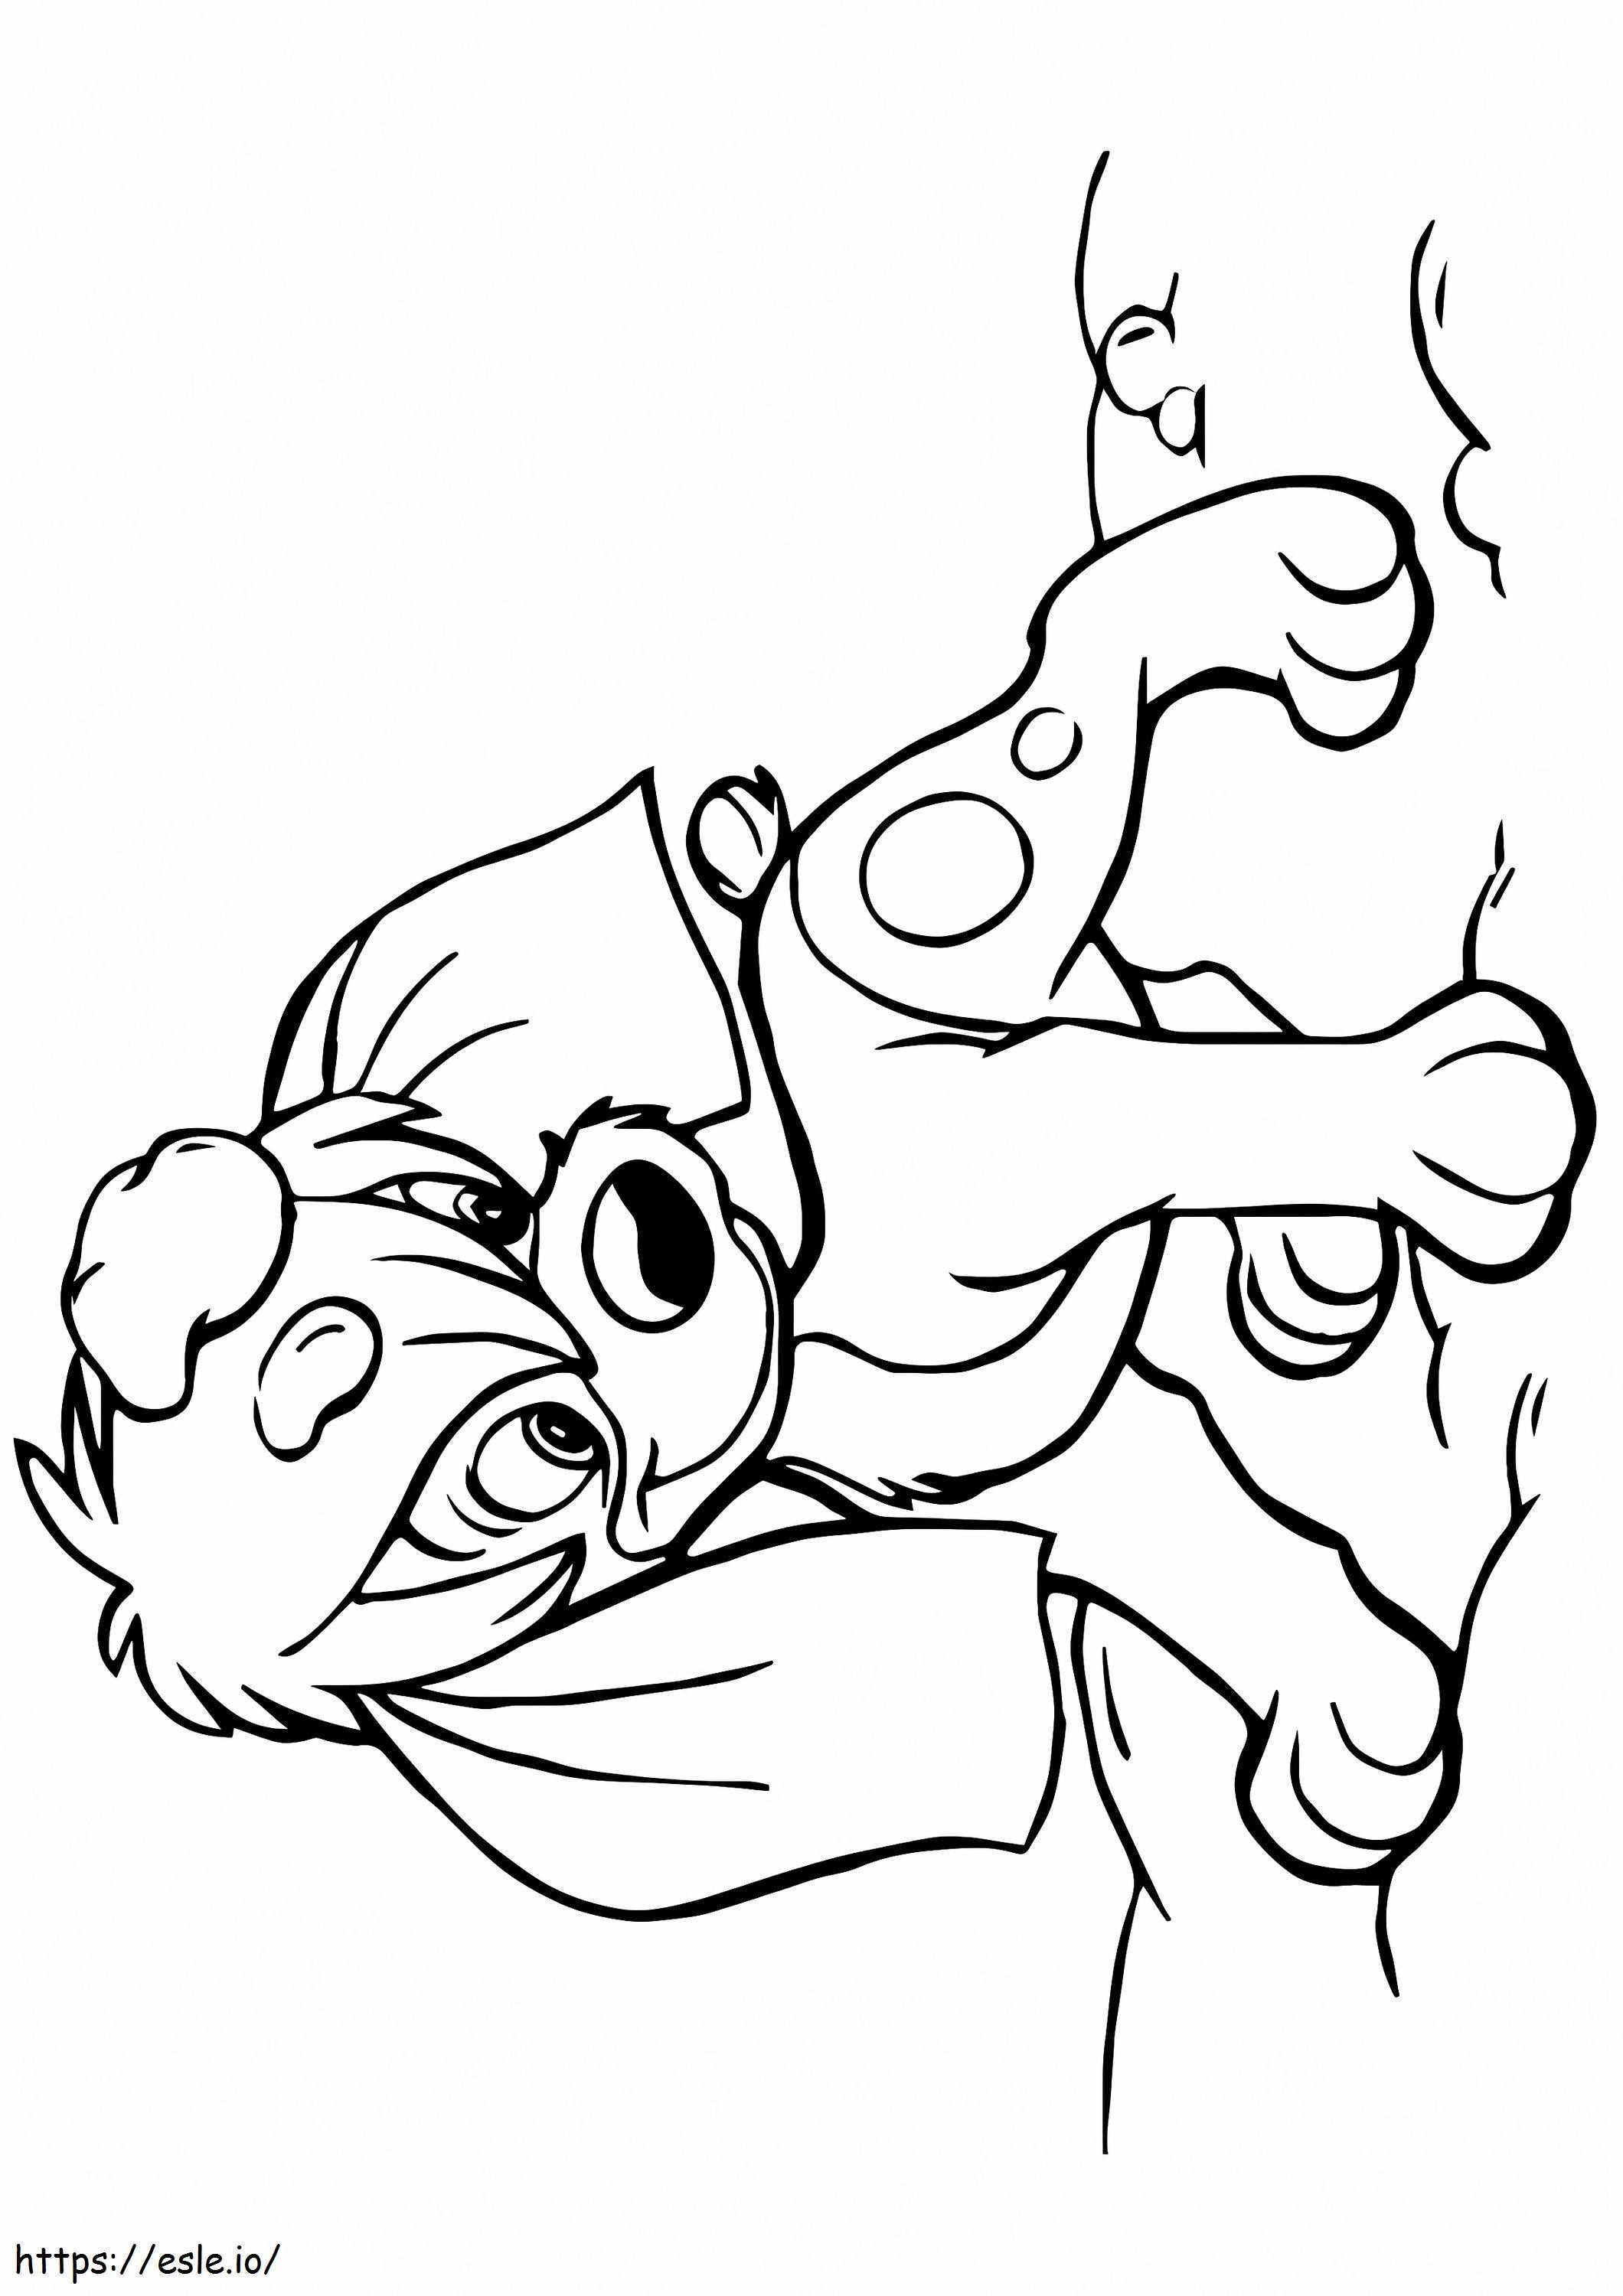 1526823973 Pooka A4 coloring page